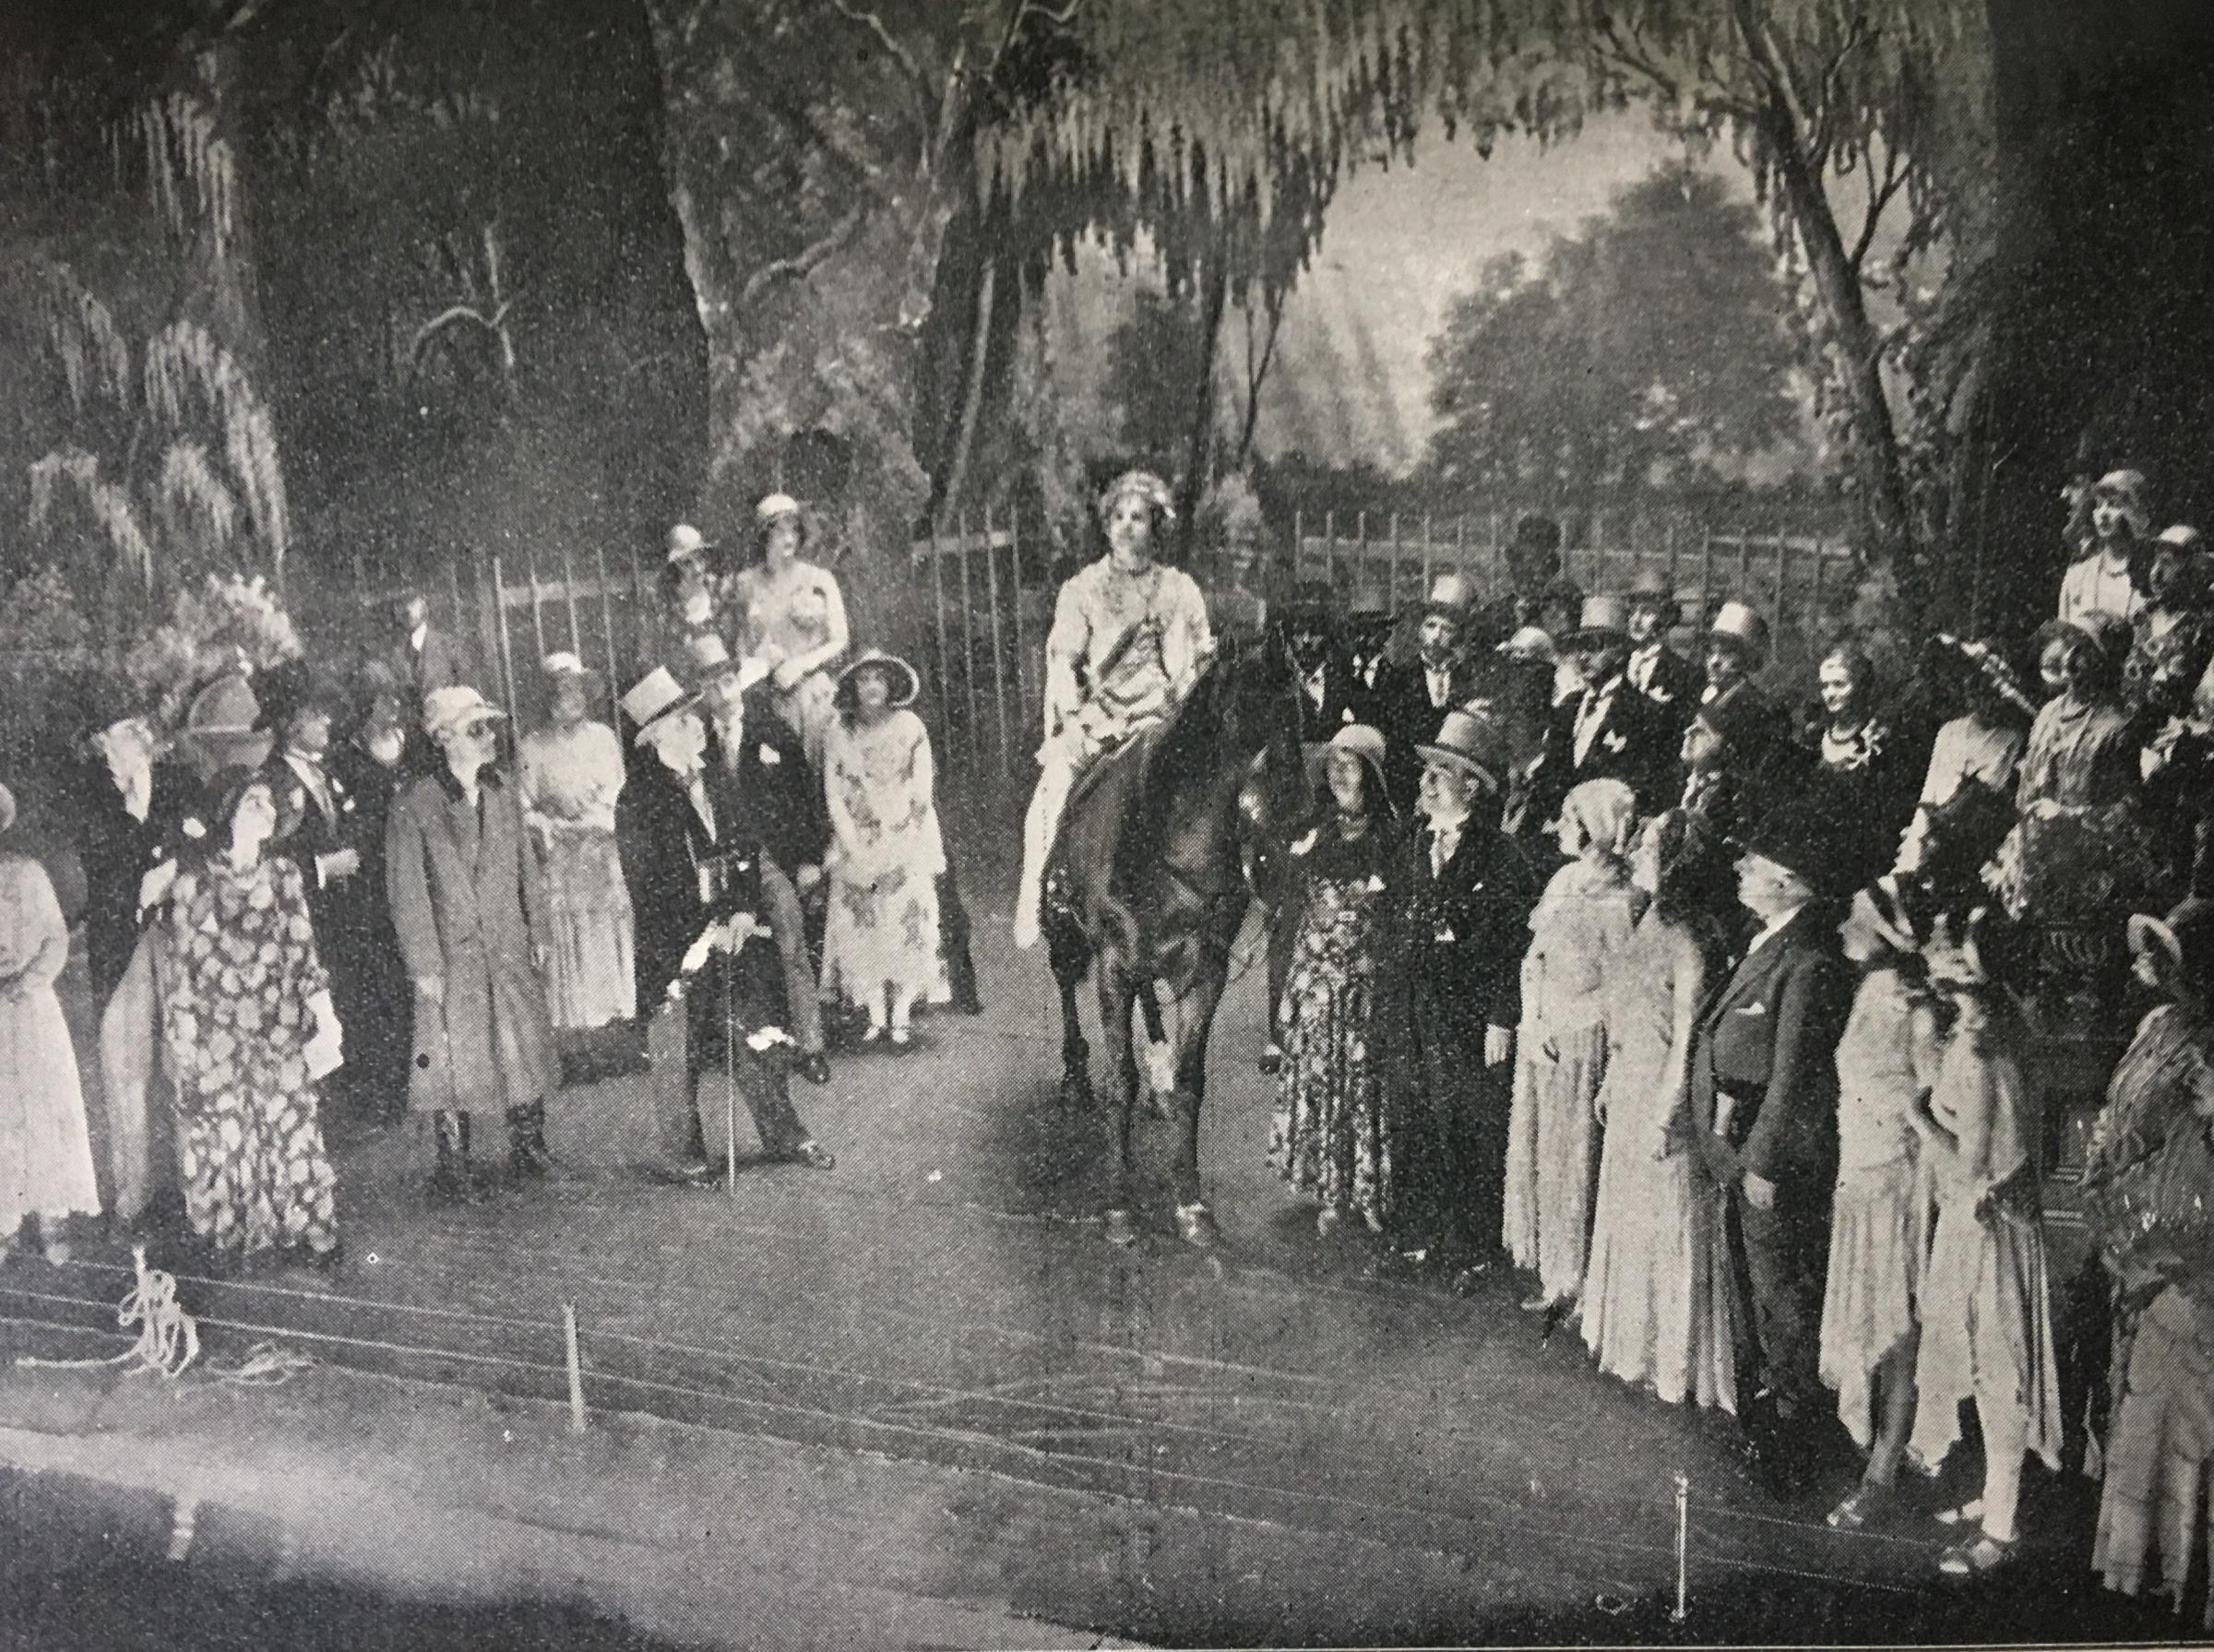 WODS’ performance of The Arcadians in 1934 which drew criticism for its “indecent costumes”